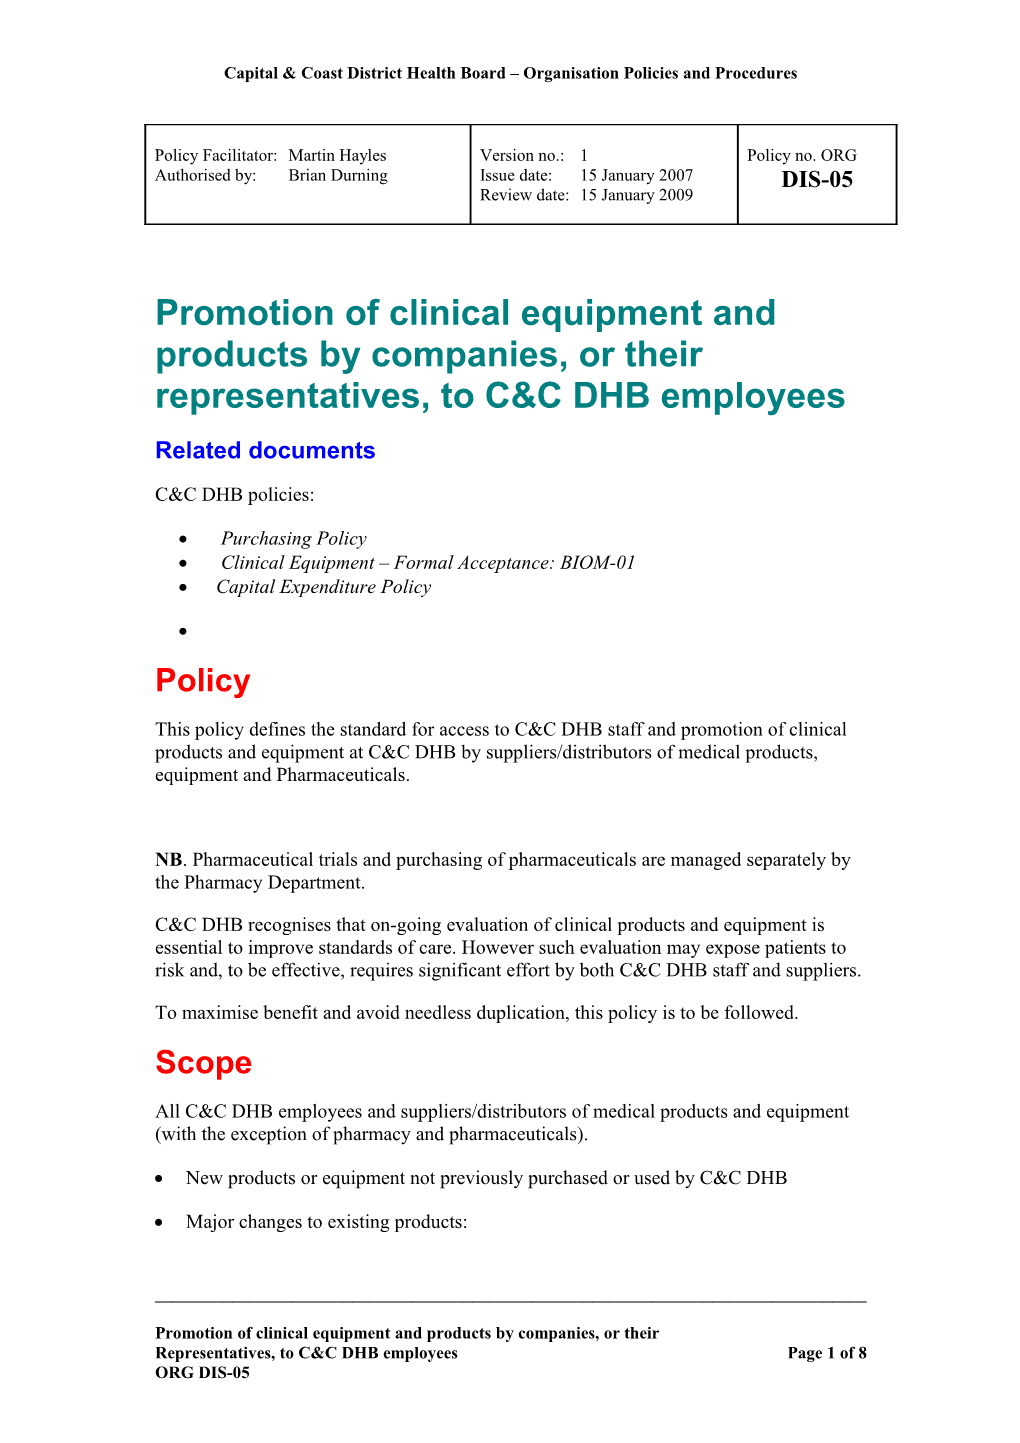 Capital & Coast District Health Board Organisation Clinical Policies and Procedures